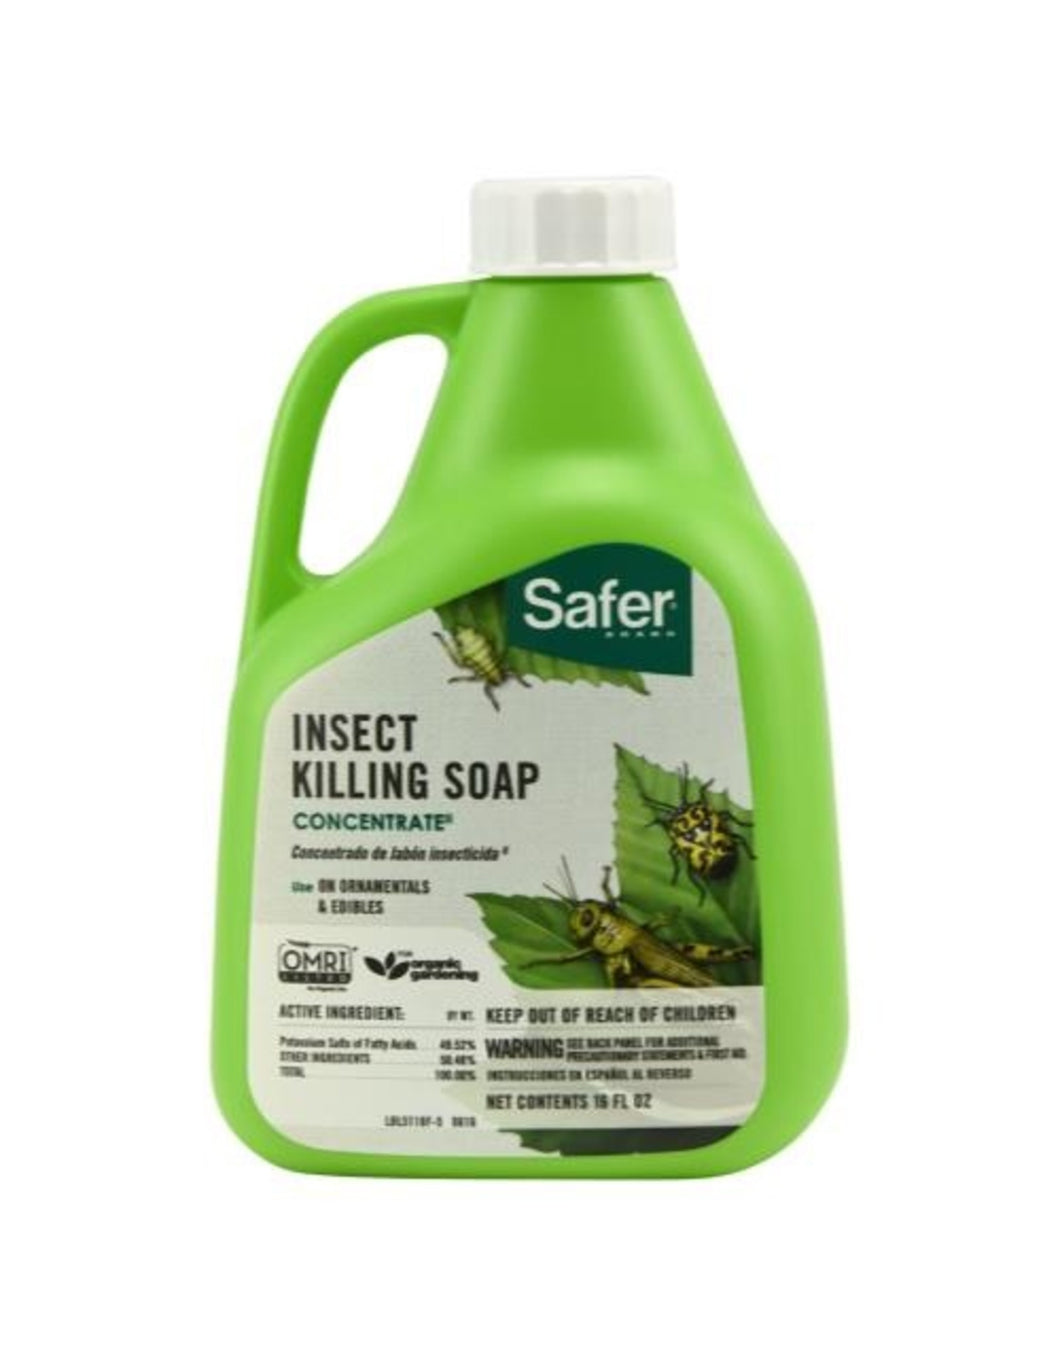 Safer - Insect Killing Soap II Conc. - 16 Oz